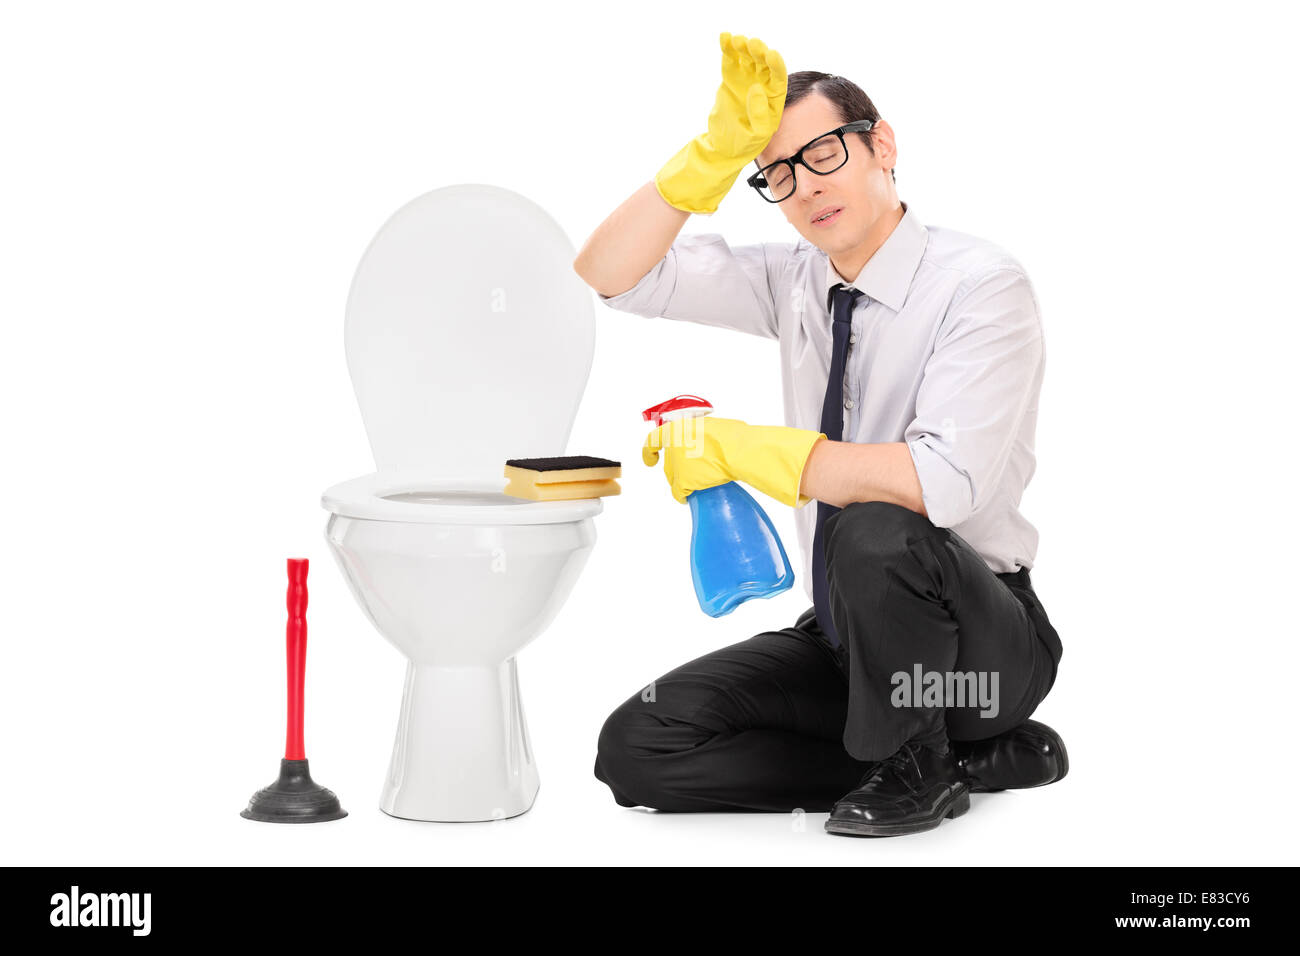 Exhausted young man cleaning a toilet isolated on white background Stock Photo